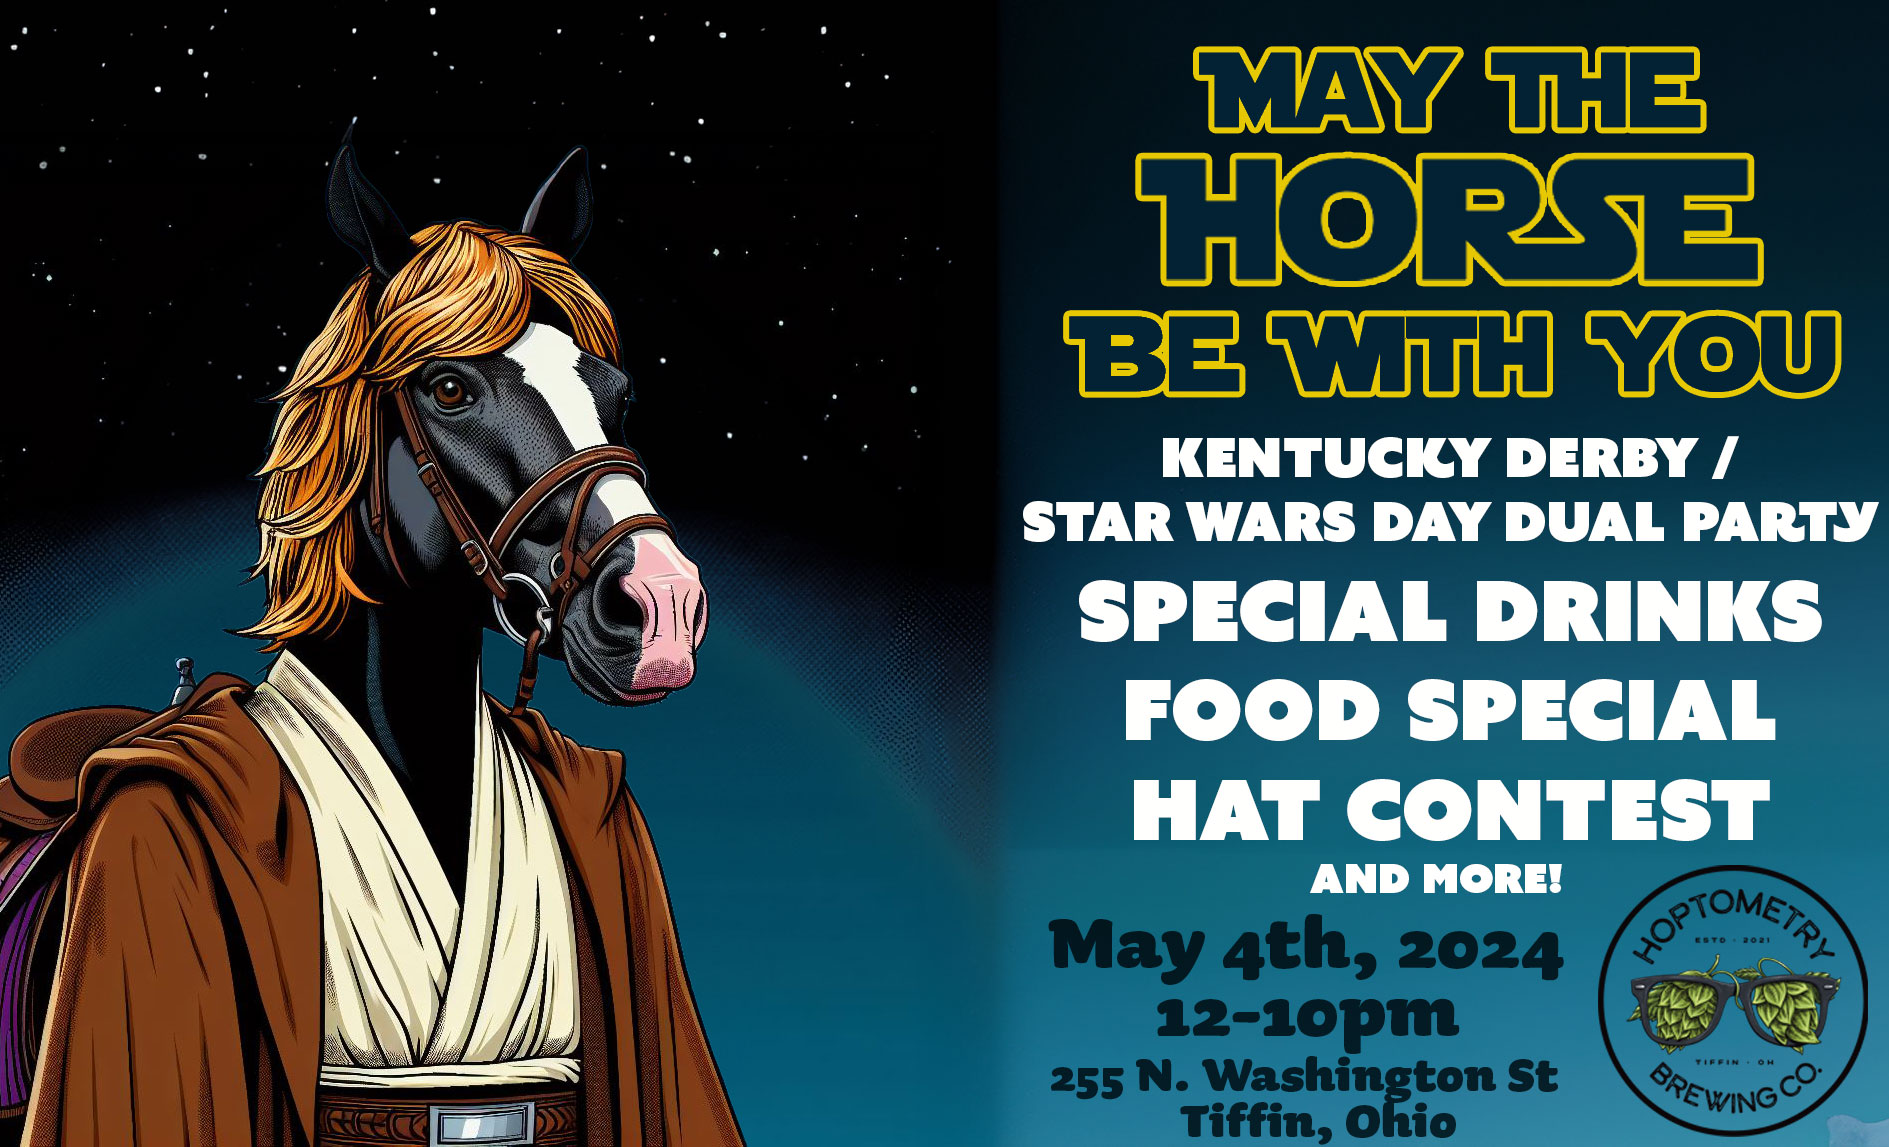 Kentucky Derby/Star Wars Day Dual Party